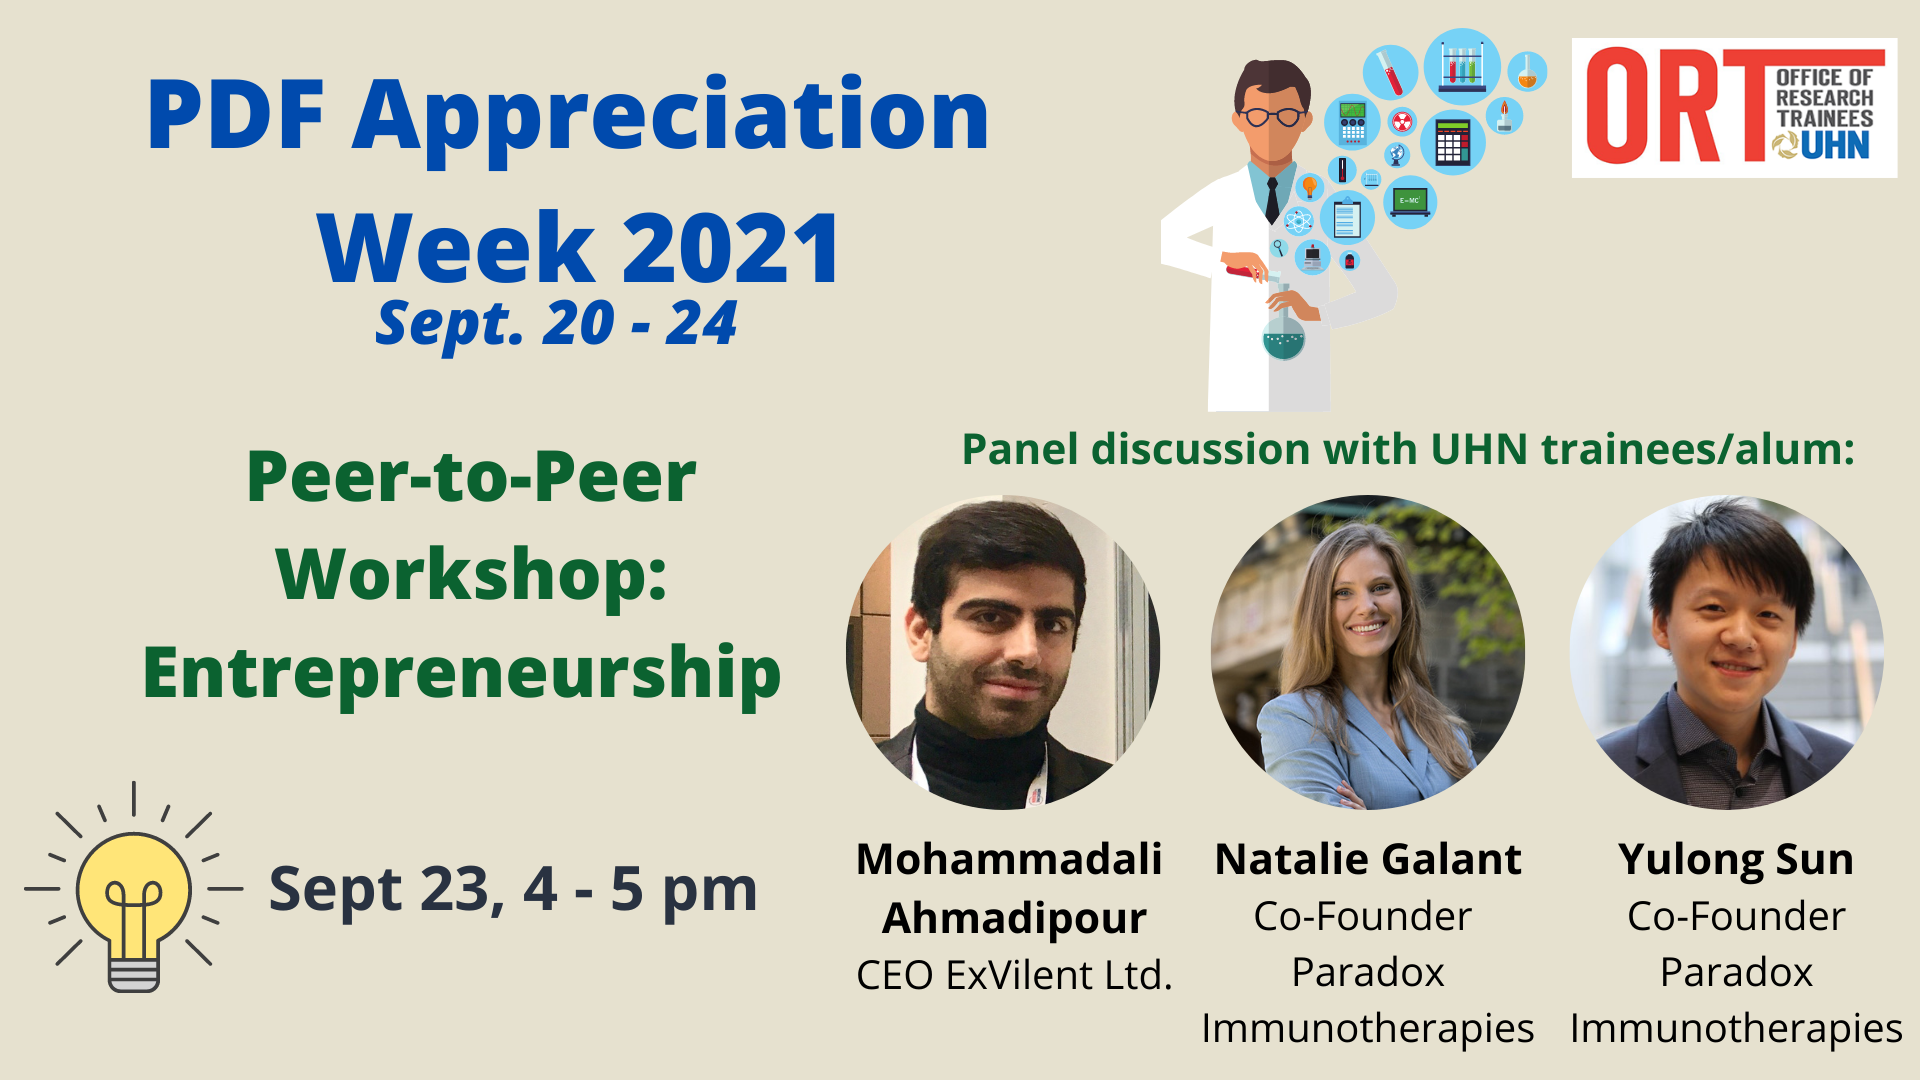 Poster for a PDF Appreciation Week 2021 (Sept 20-24) event. Peer-to-Peer Workshop: Entrepreneurship. Sept 23, 4-5 pm. Panel discussion with UHN trainees/alum: Mohammadali Ahmadpour, CEO ExVilent Ltd.; Natalie Galant, Co-Founder Paradox Immunotherapies; Yulong Sun, Co-Founder Paradox Immunotherapies. The poster includes the ORT logo and photos of all three speakers.